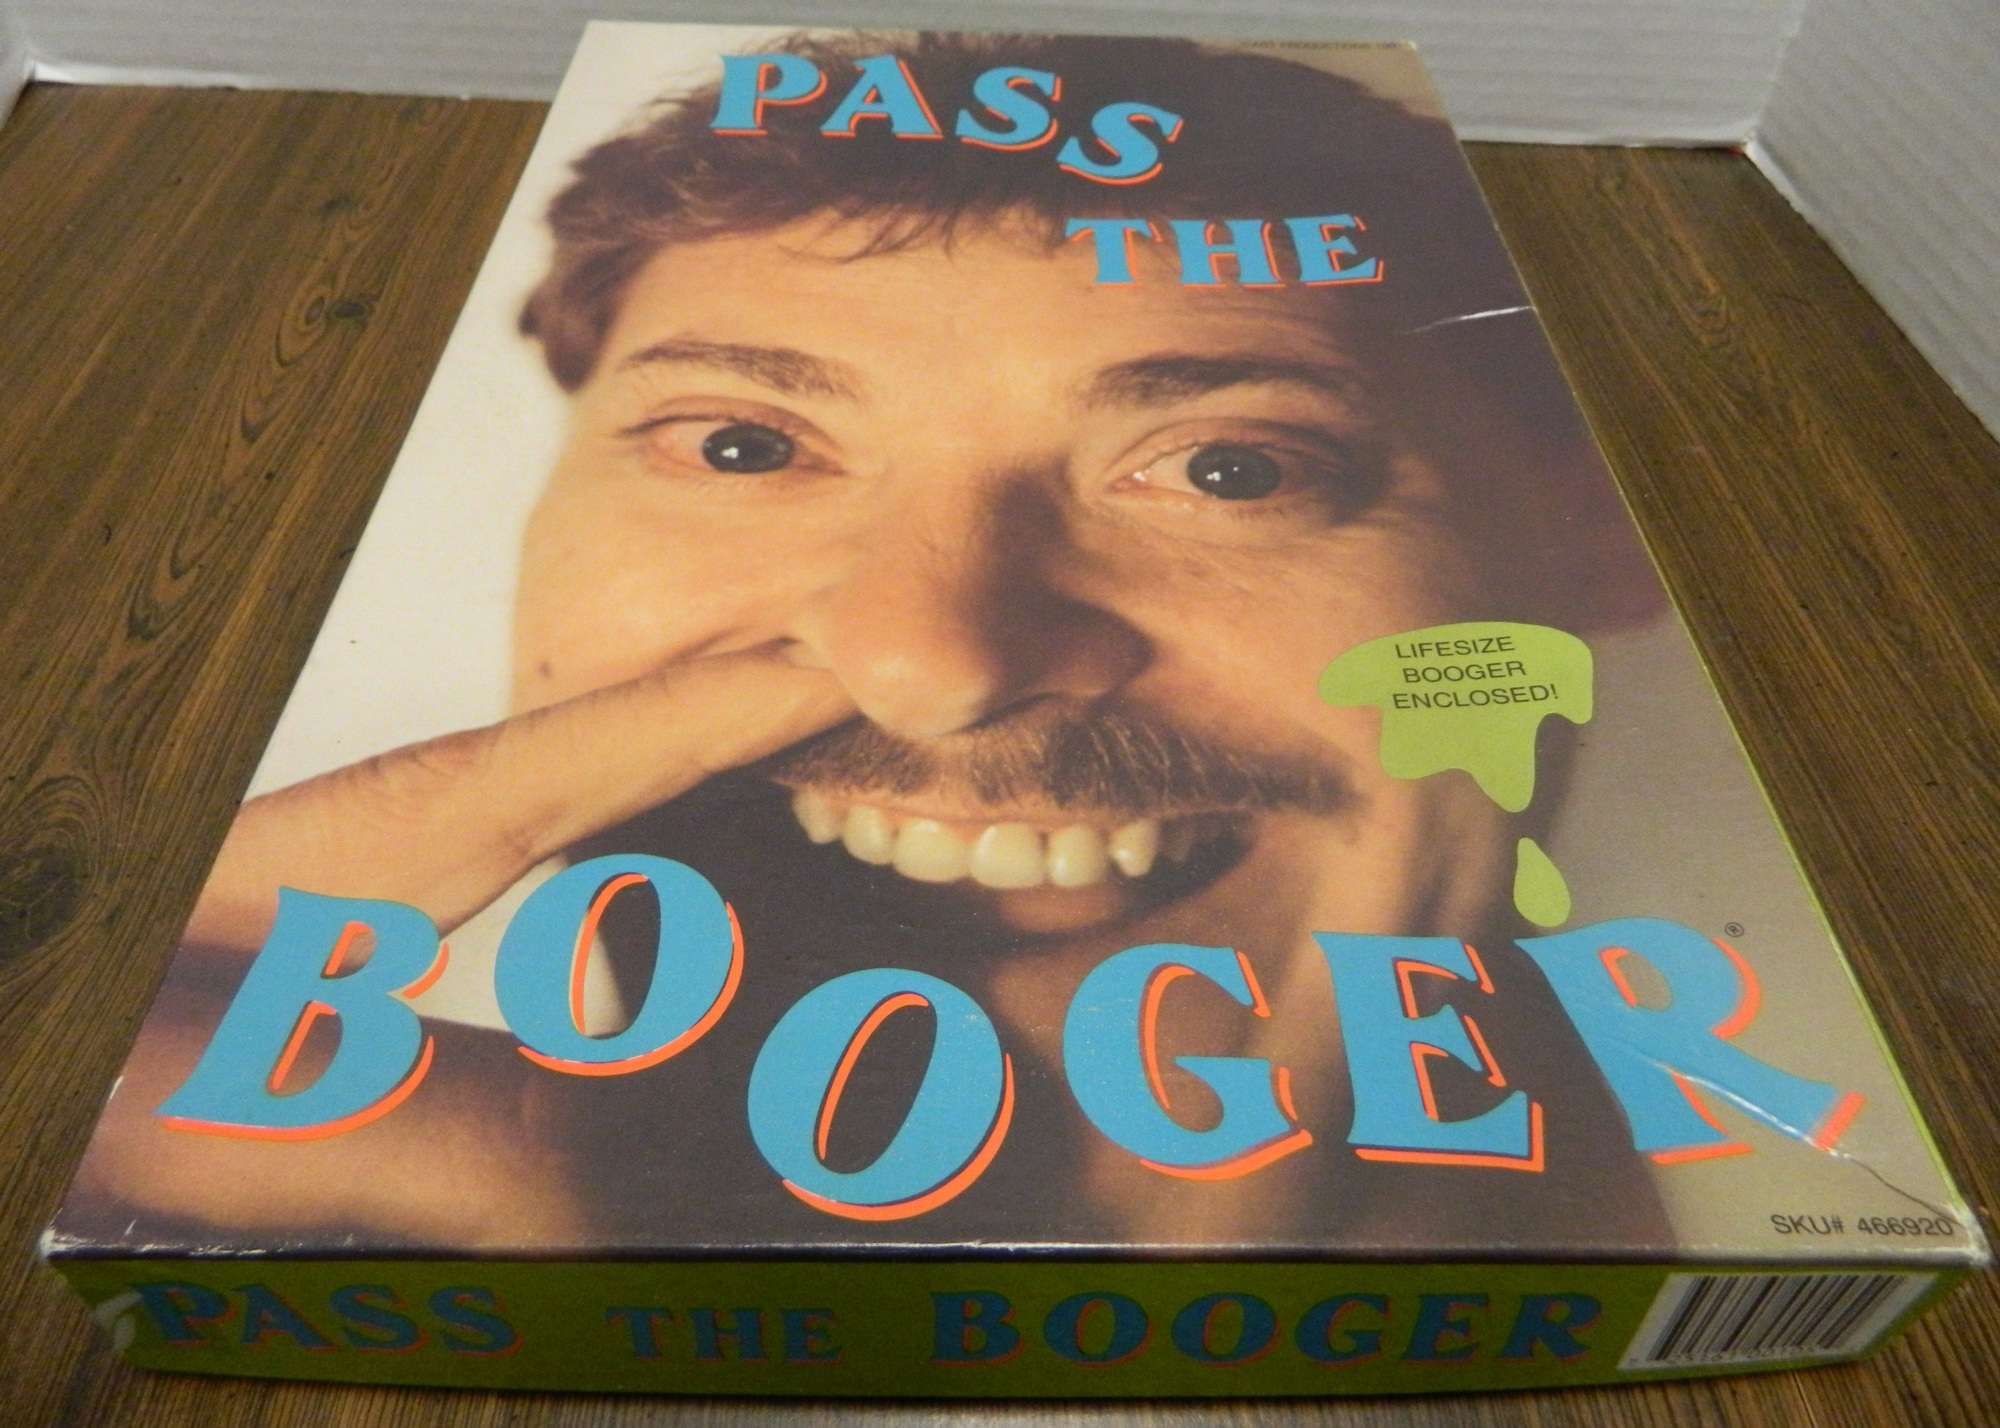 Pass The Booger Board Game Review and Instructions